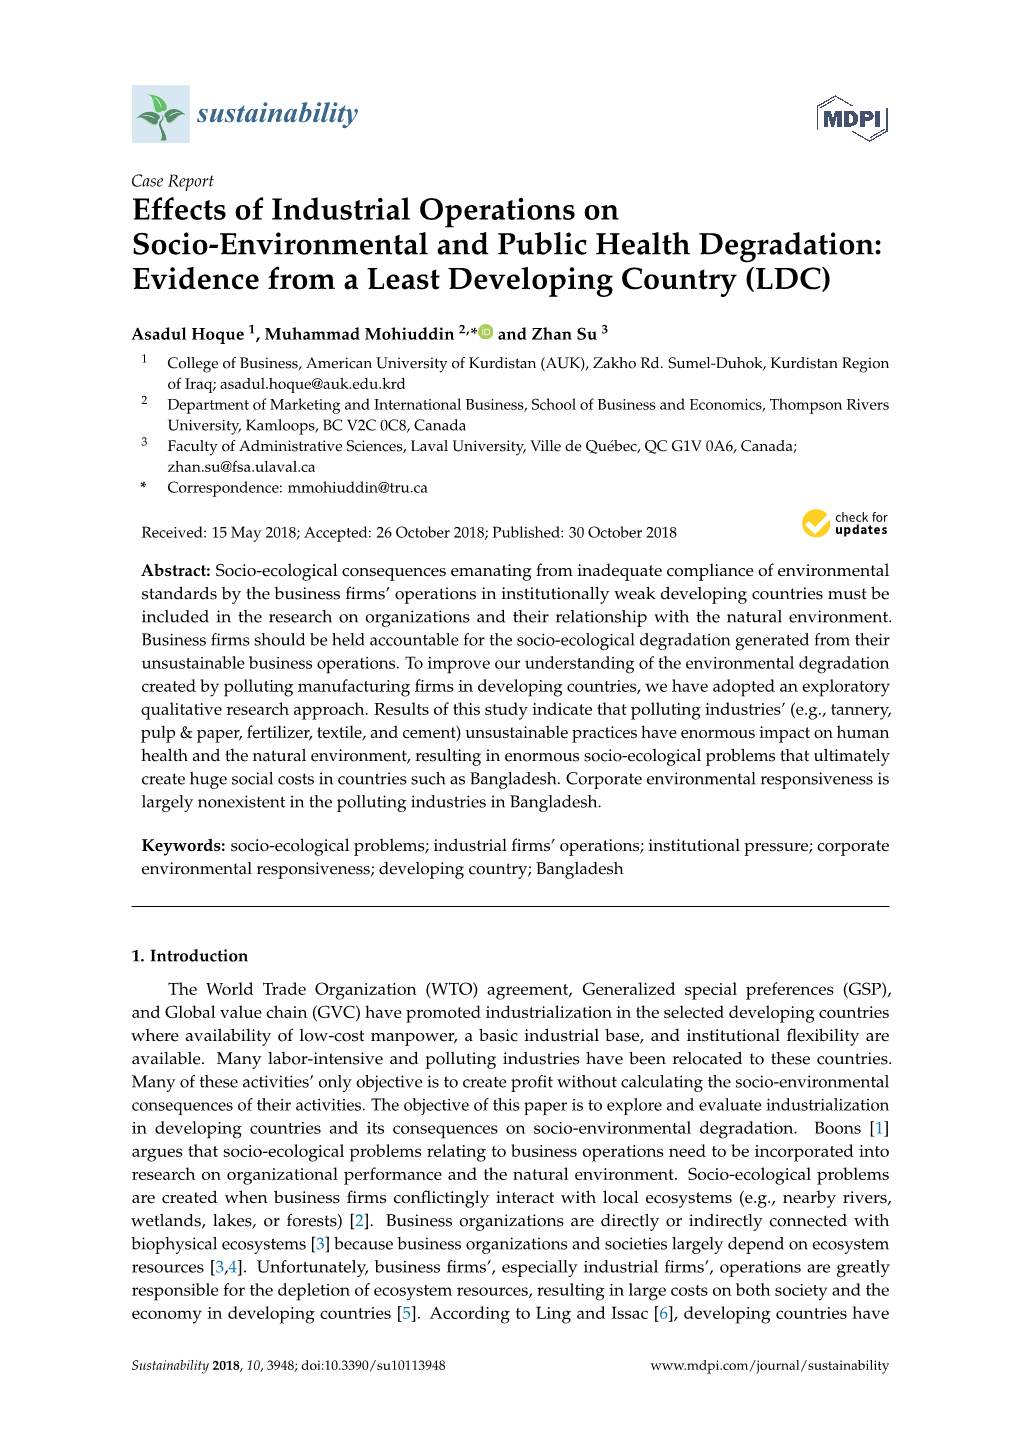 Effects of Industrial Operations on Socio-Environmental and Public Health Degradation: Evidence from a Least Developing Country (LDC)